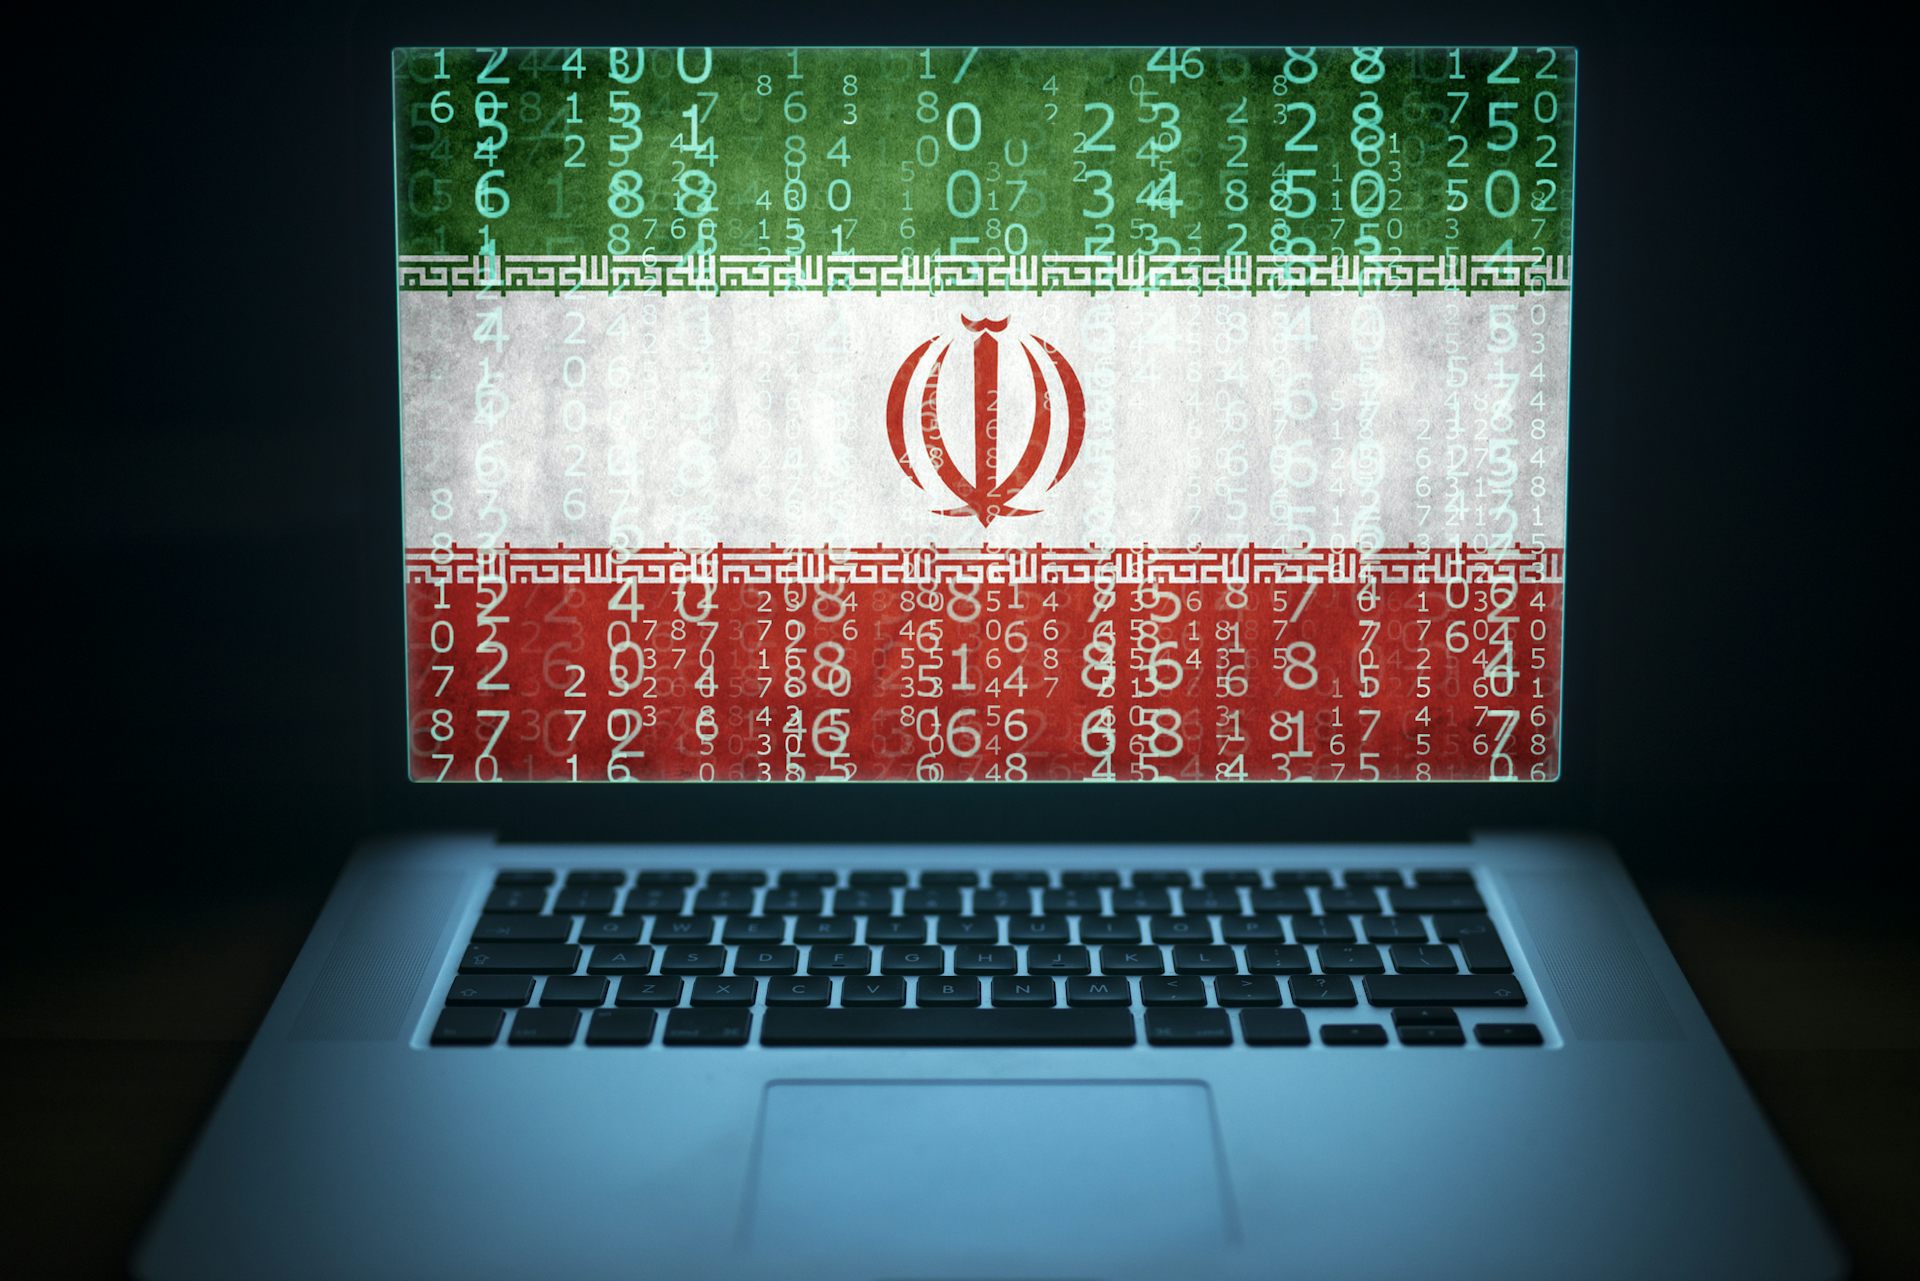 How Real Is the Threat of Cyberwar Between Iran and the U.S?